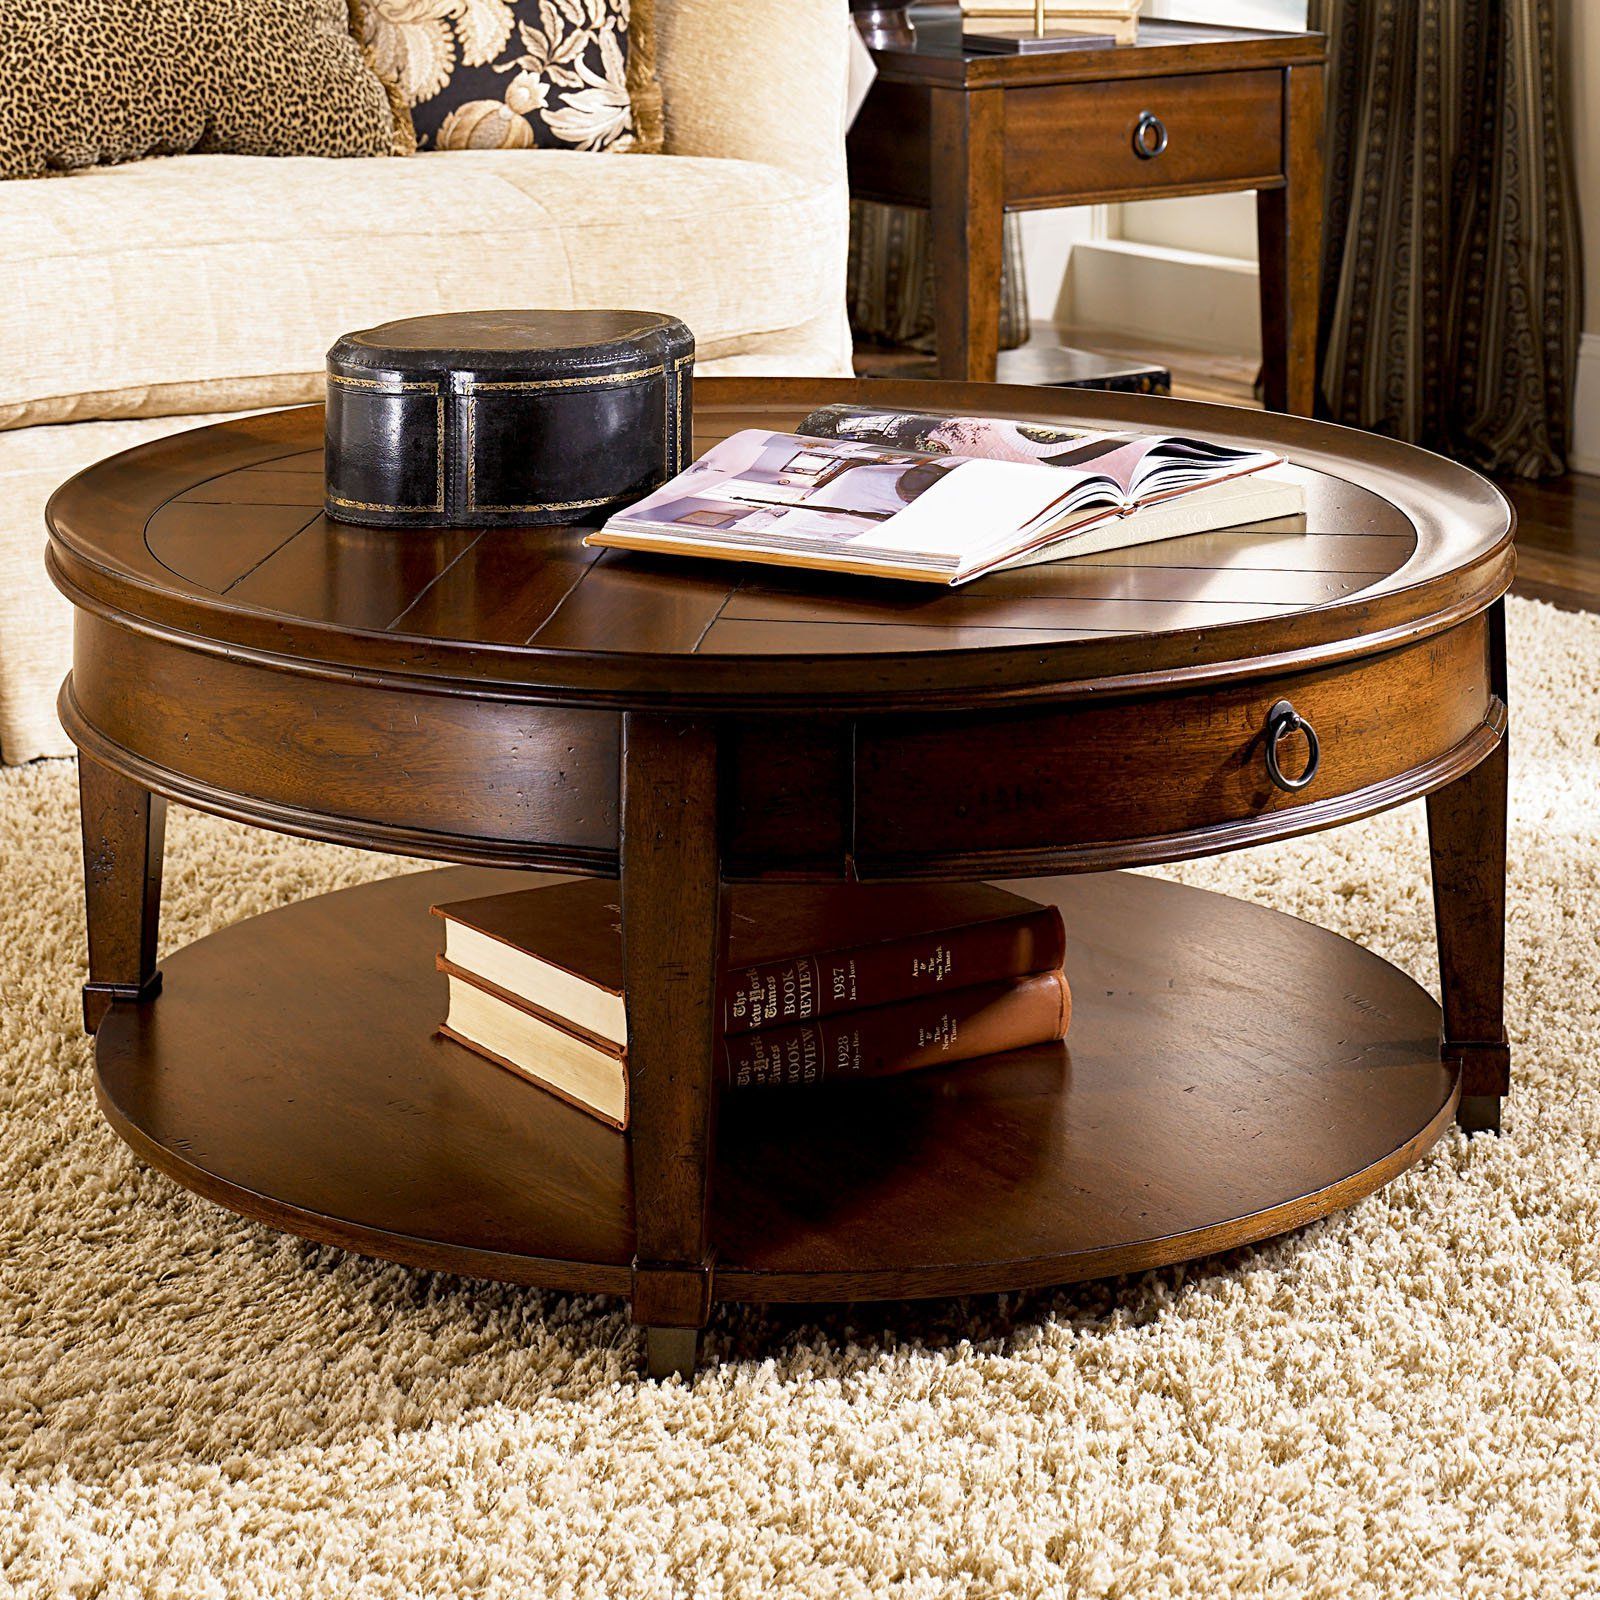 Hammary Sunset Valley Round Cocktail Table – Rich Mahogany | Mahogany Intended For American Heritage Round Coffee Tables (Gallery 16 of 20)